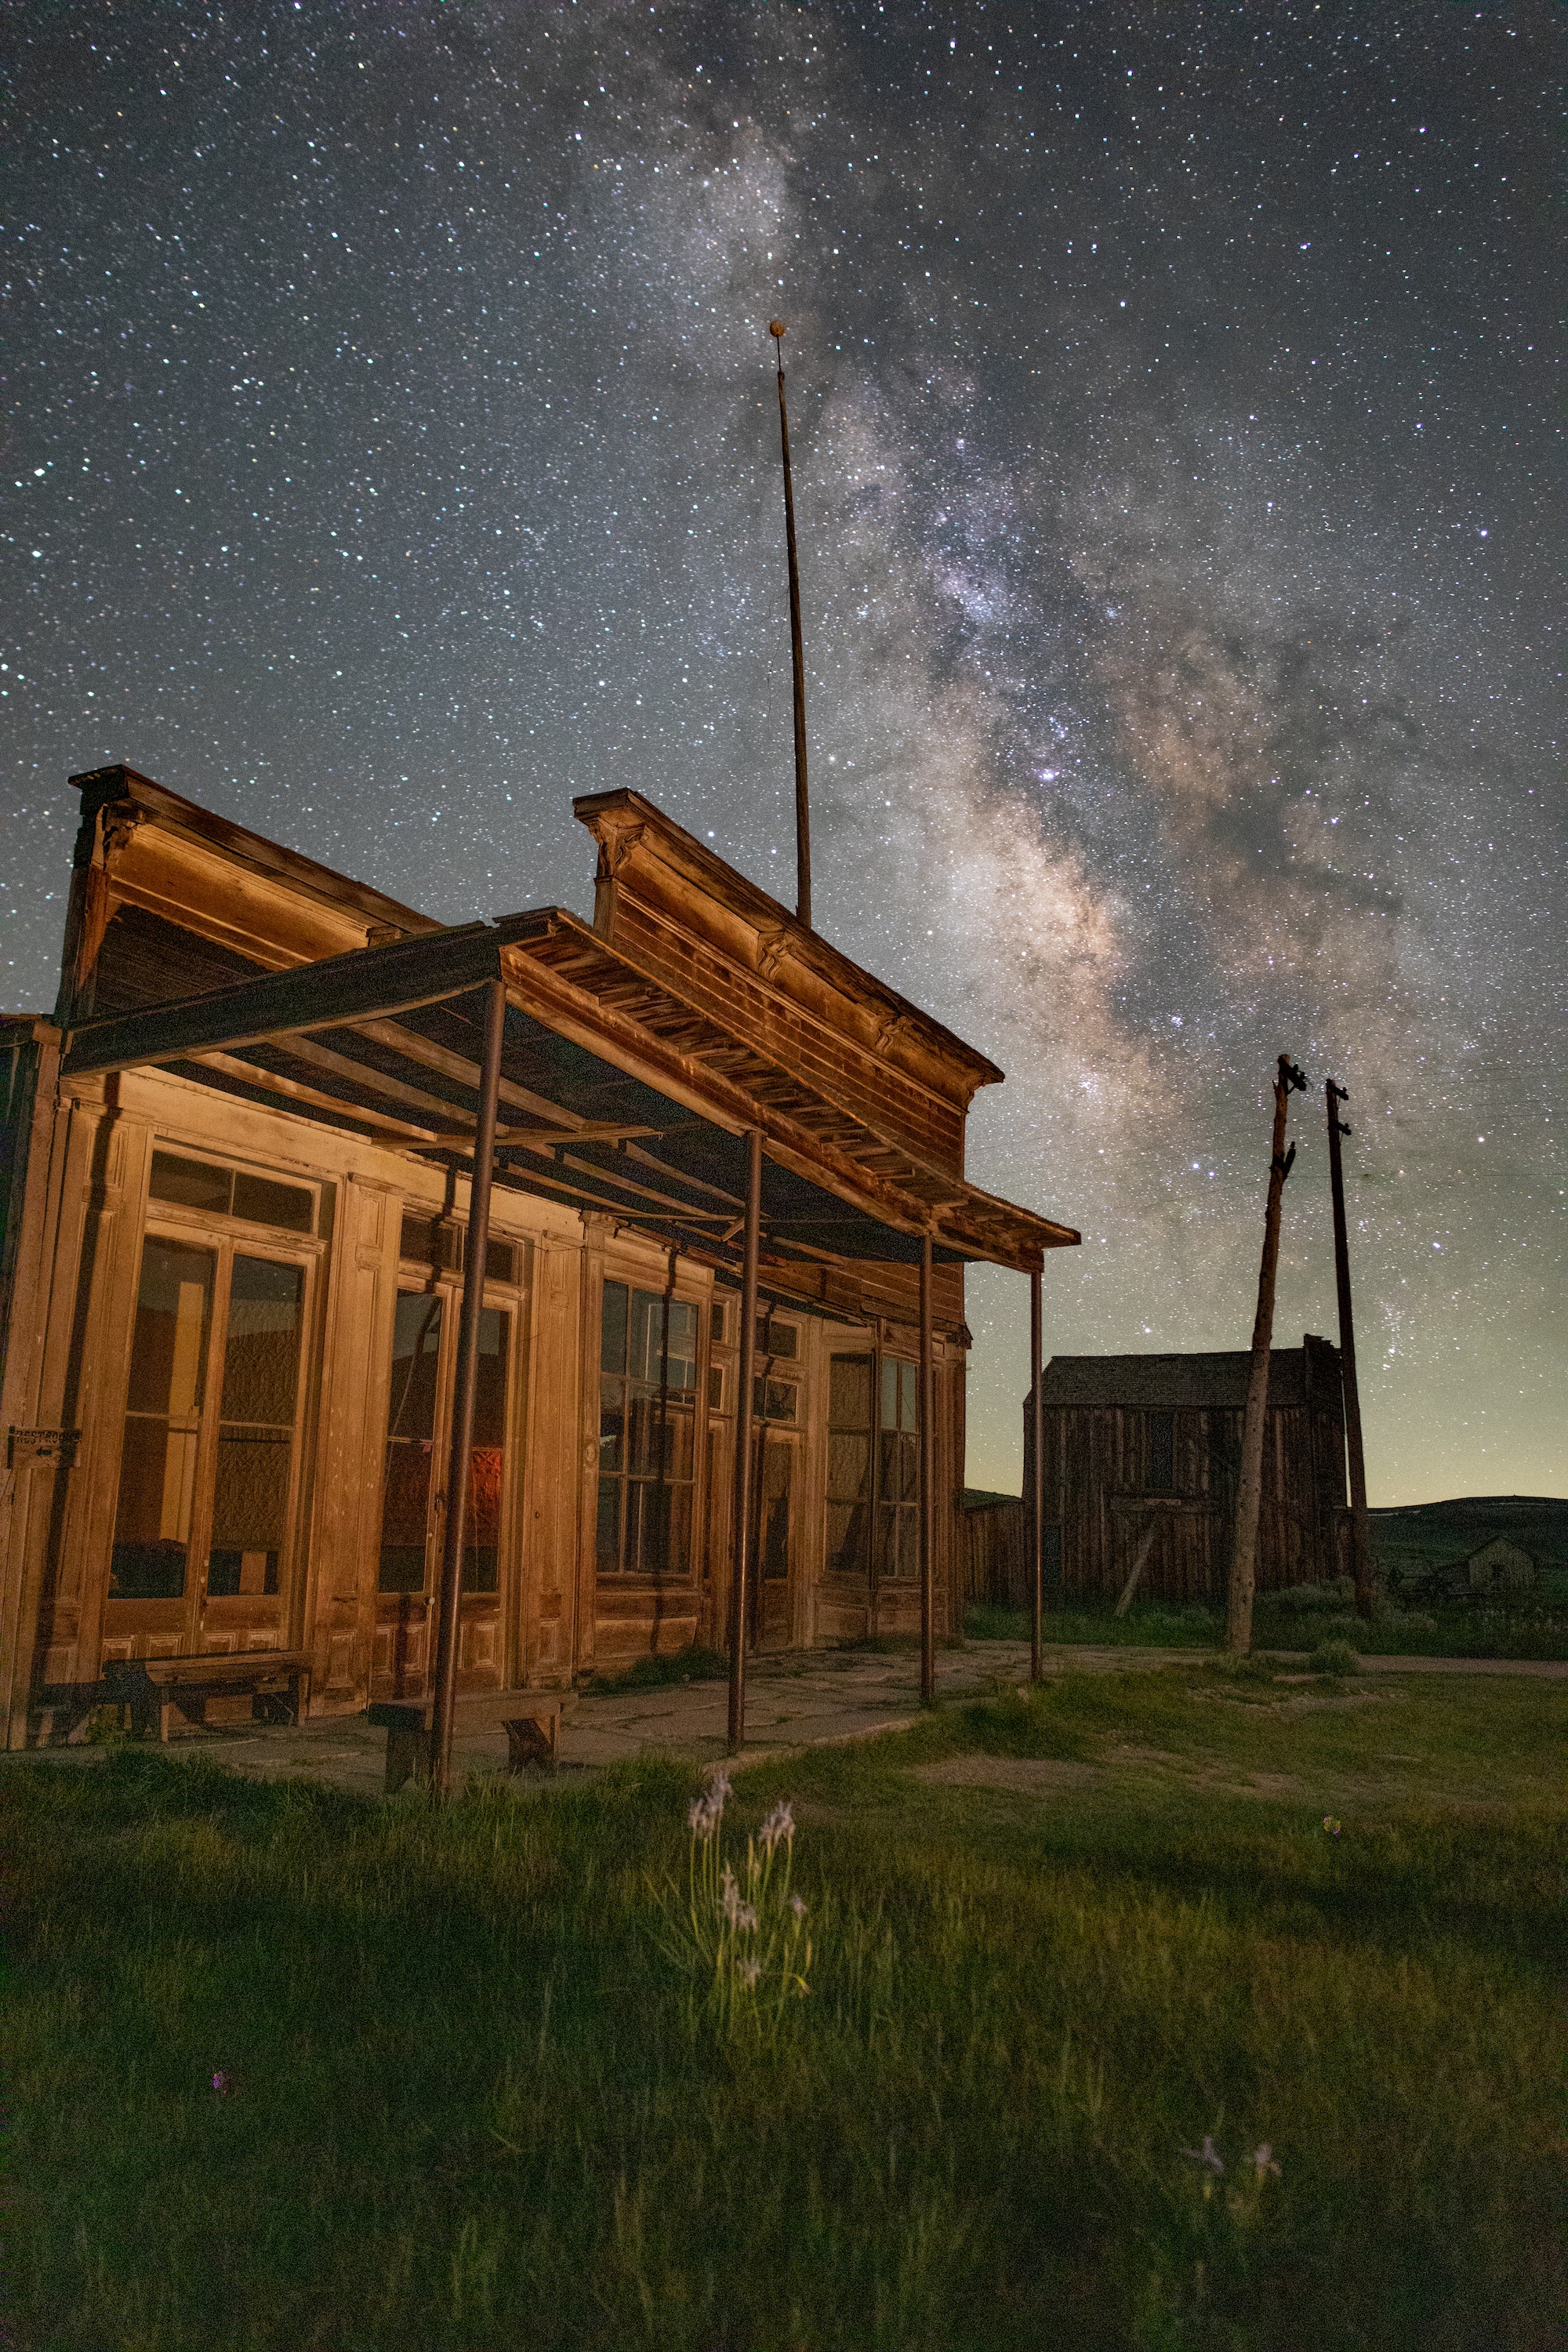 an old wooden building with large windows in front at night under a starry sky